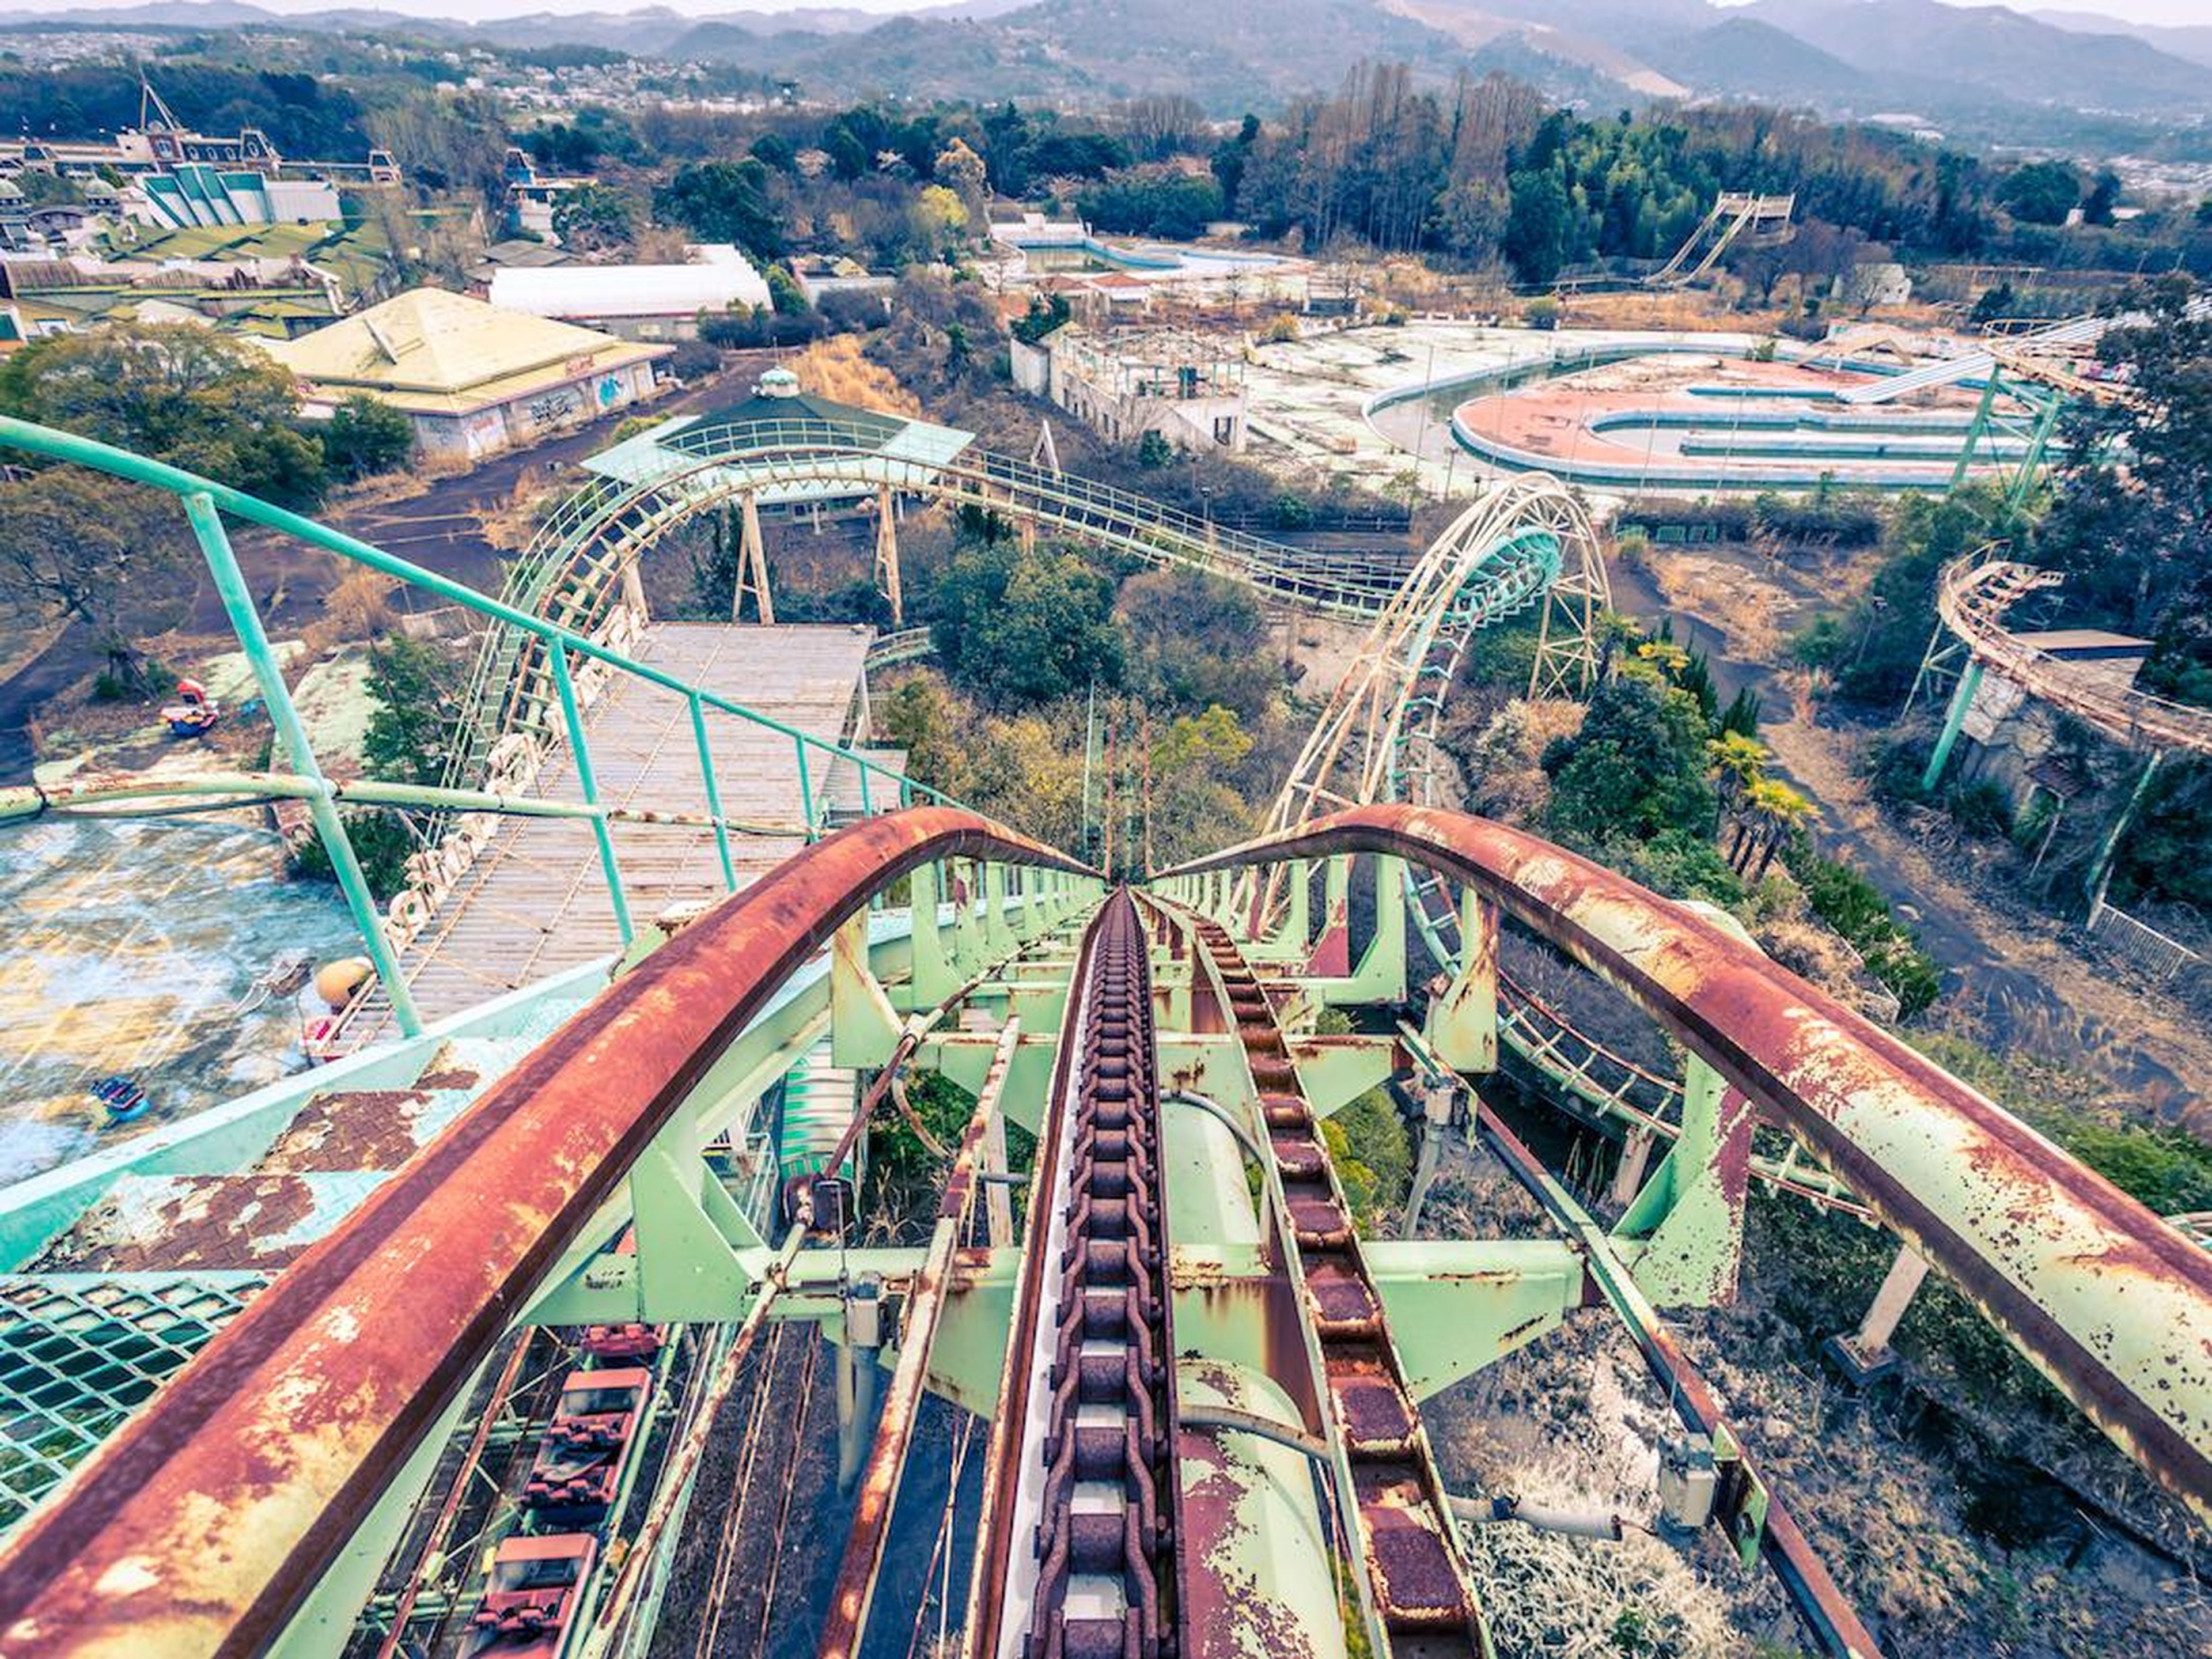 Nara Dreamland was inspired by Disneyland but went abandoned for around 10 years.